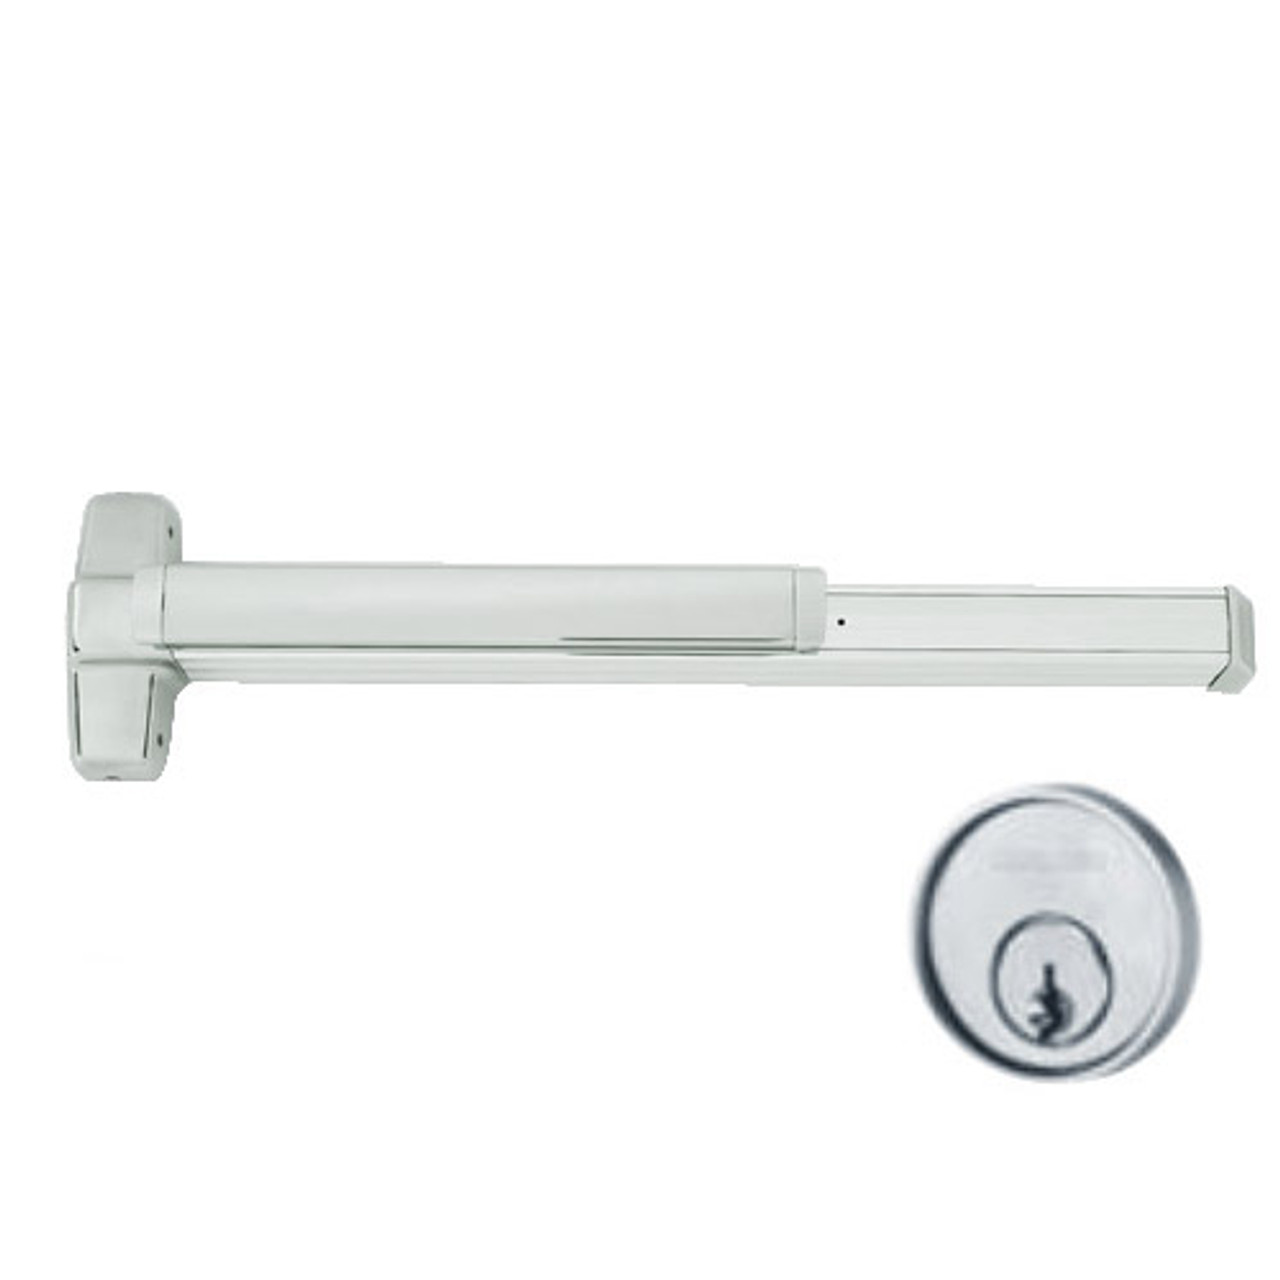 QEL9847WDC-NL-OP-US26D-4 Von Duprin Exit Device with Quiet Electric Latch in Satin Chrome